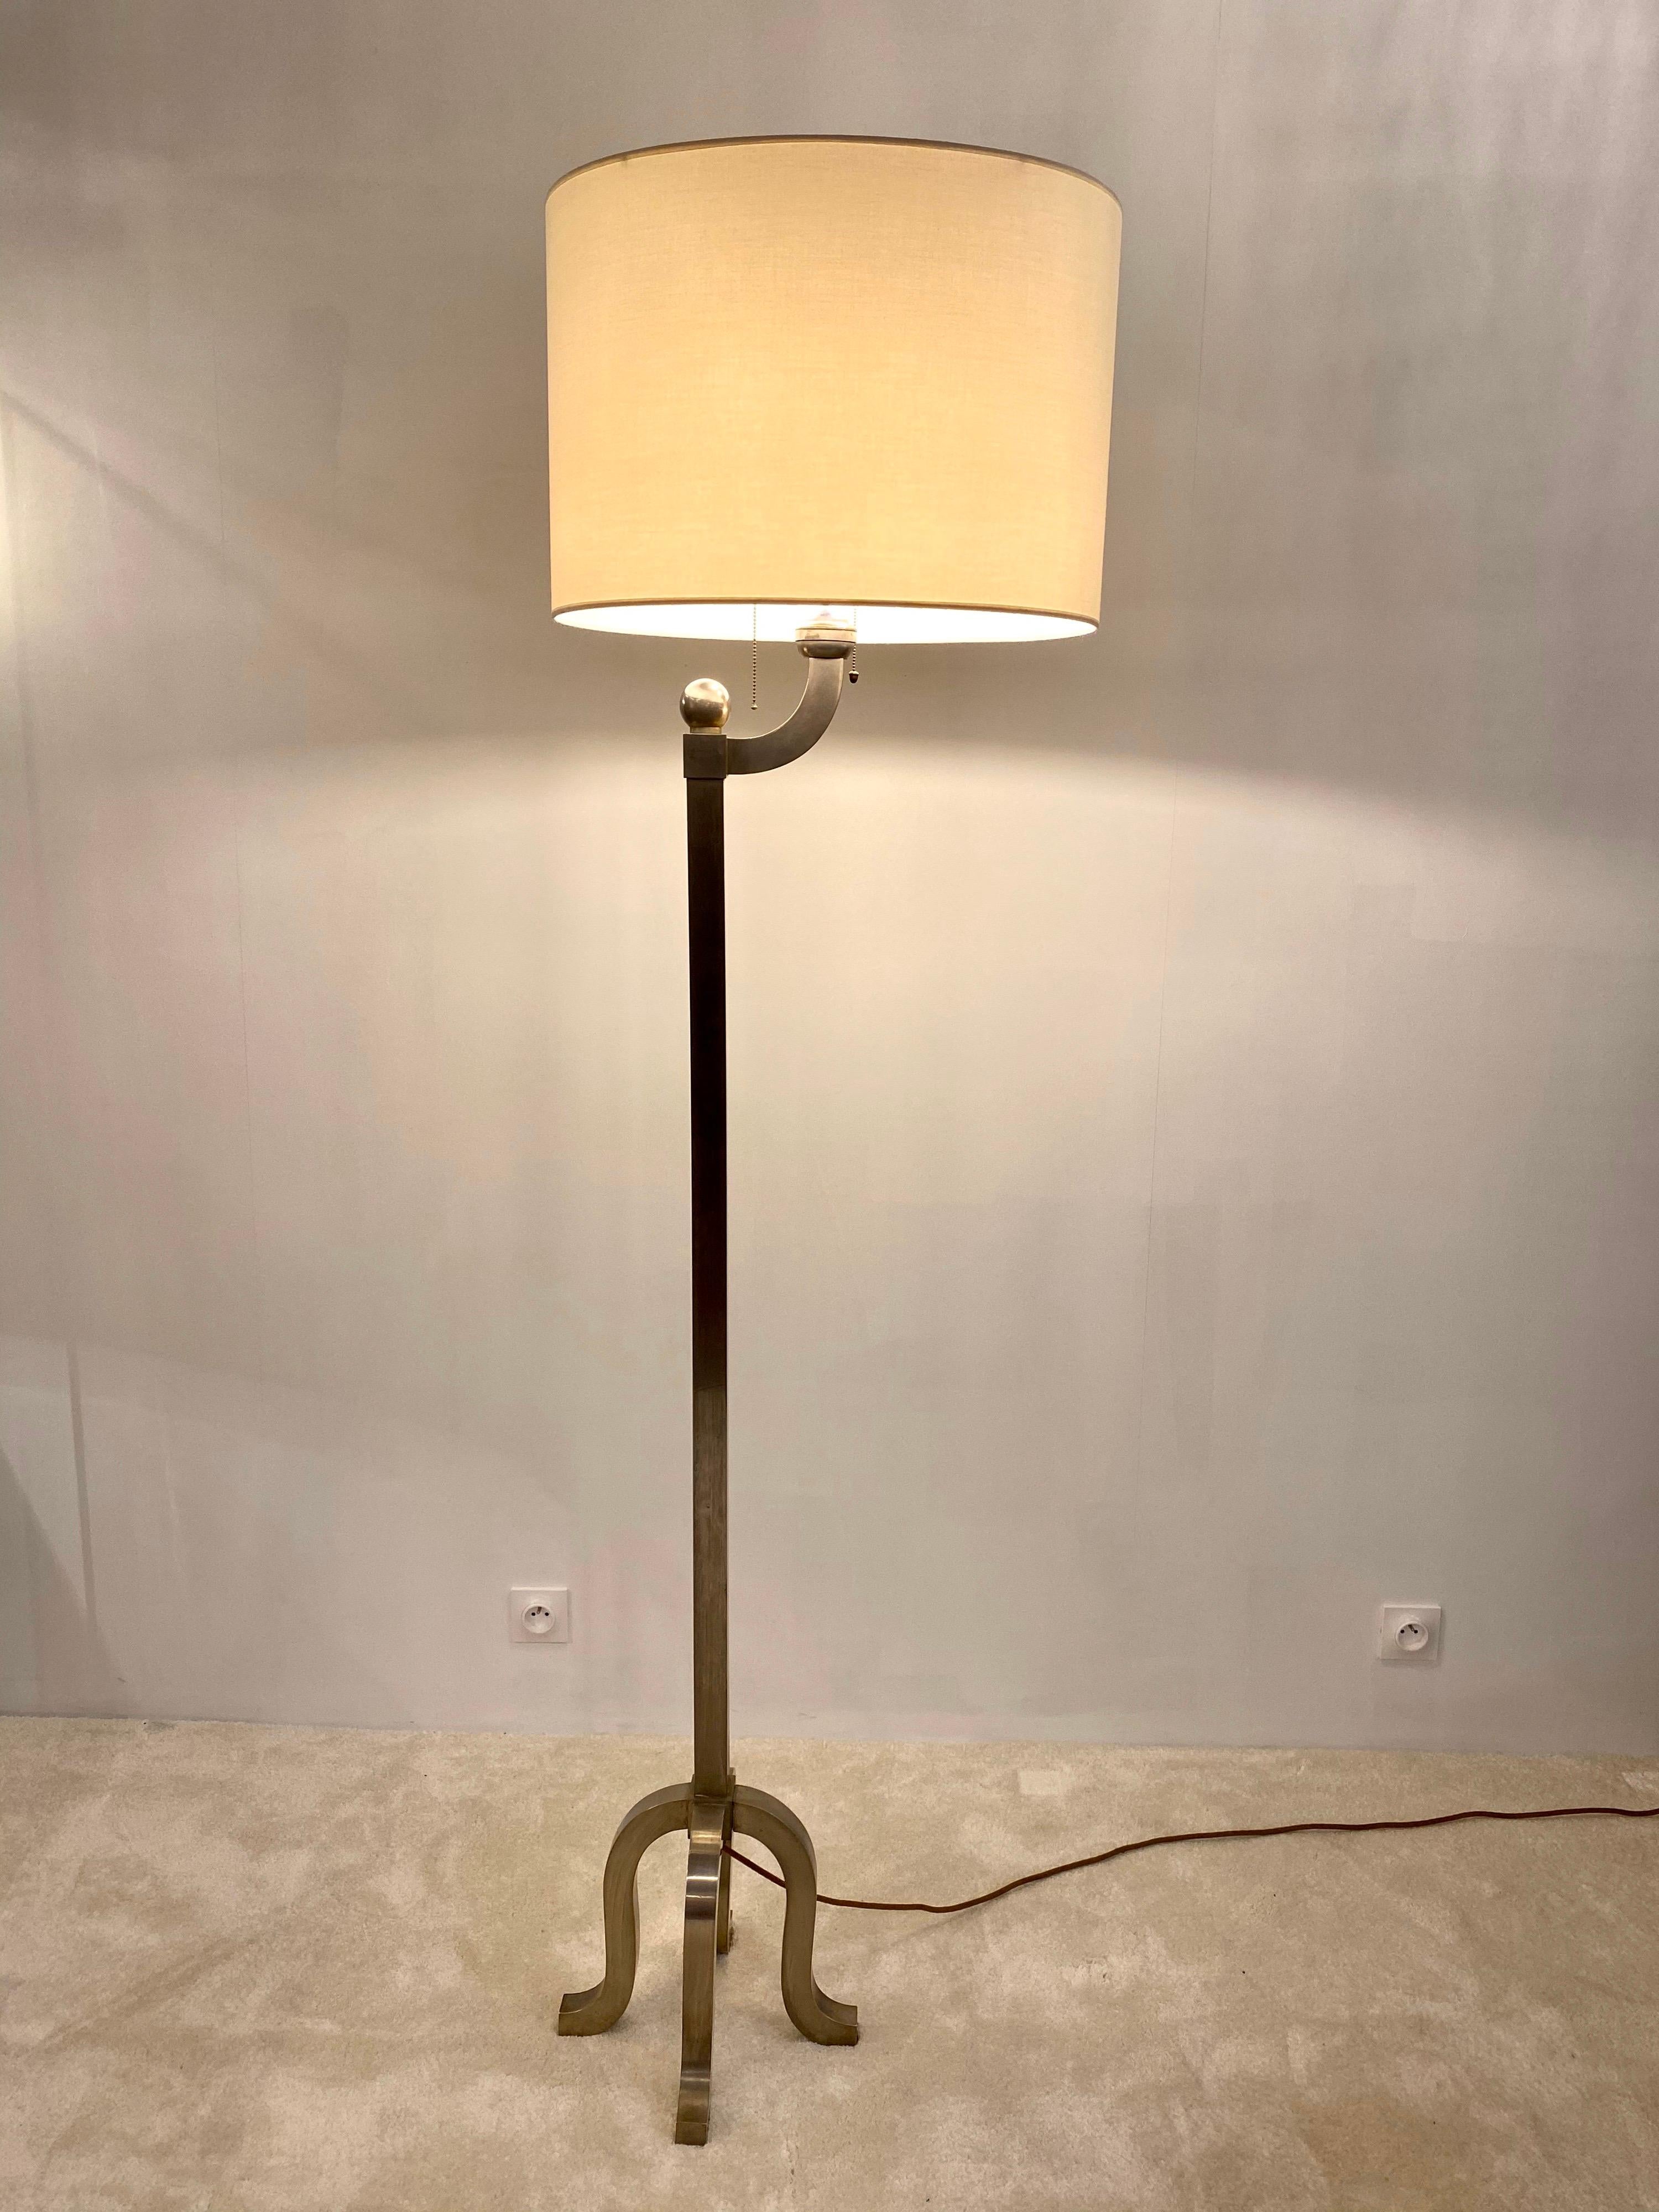 A long, lean, elegant floor lamp, certainly created by jaques Adnet in the 1930s.
This piece is made of nickel-plated metal (mat effect) and an innovative adjustable ball joint to incline the top frame as you desire.
Four feet, heavy for stability